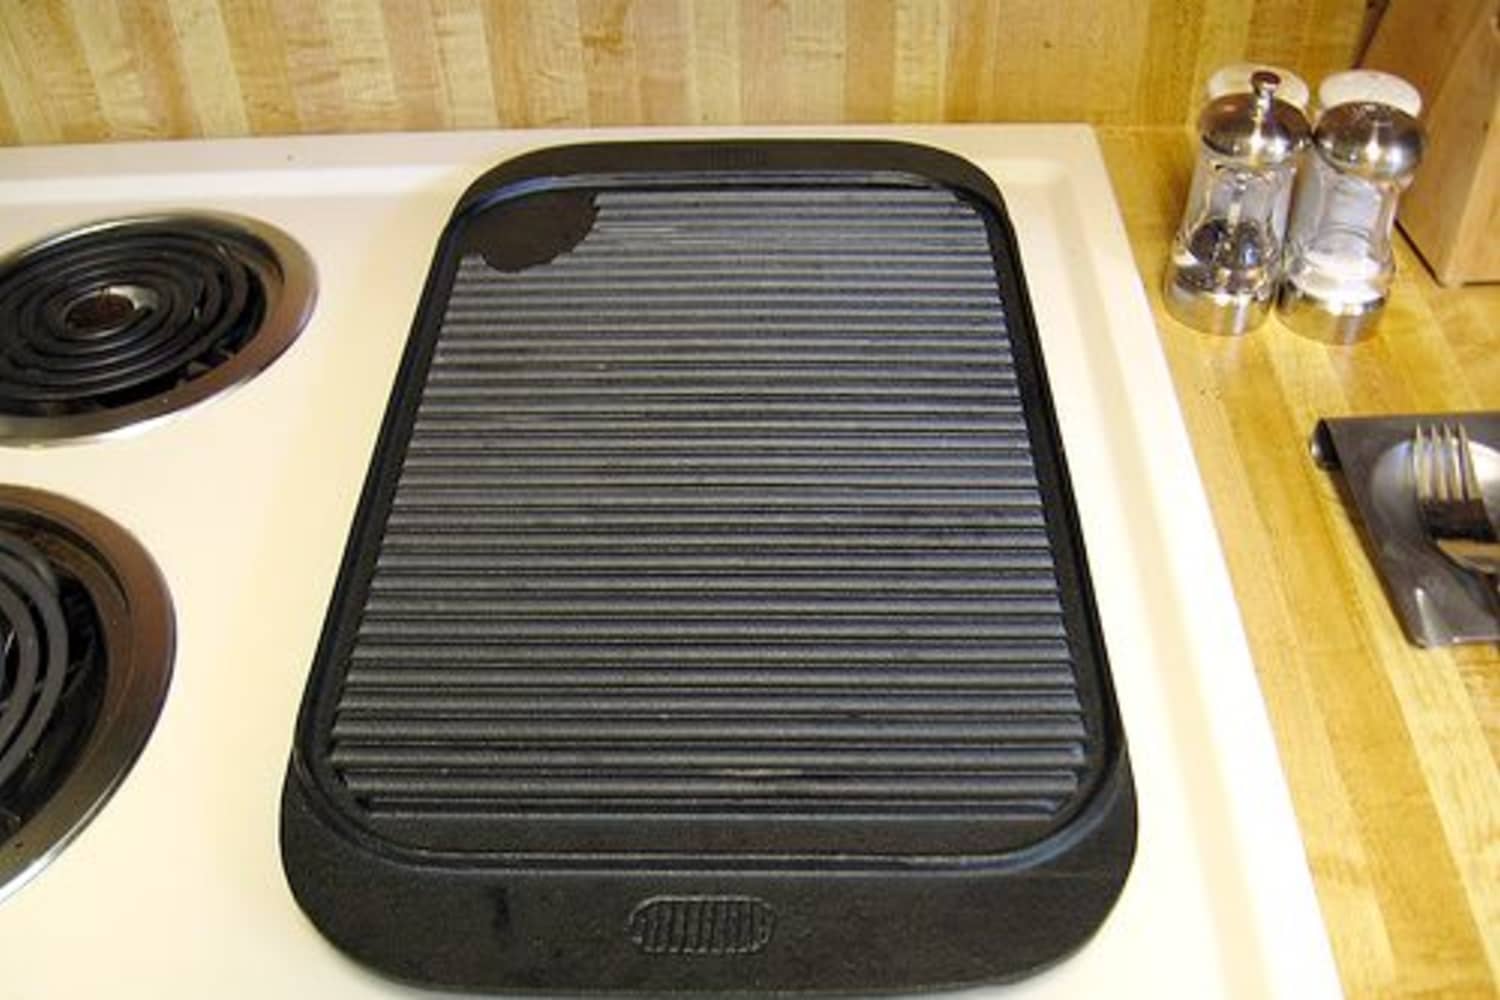 Grill Pans For Electric Stoves